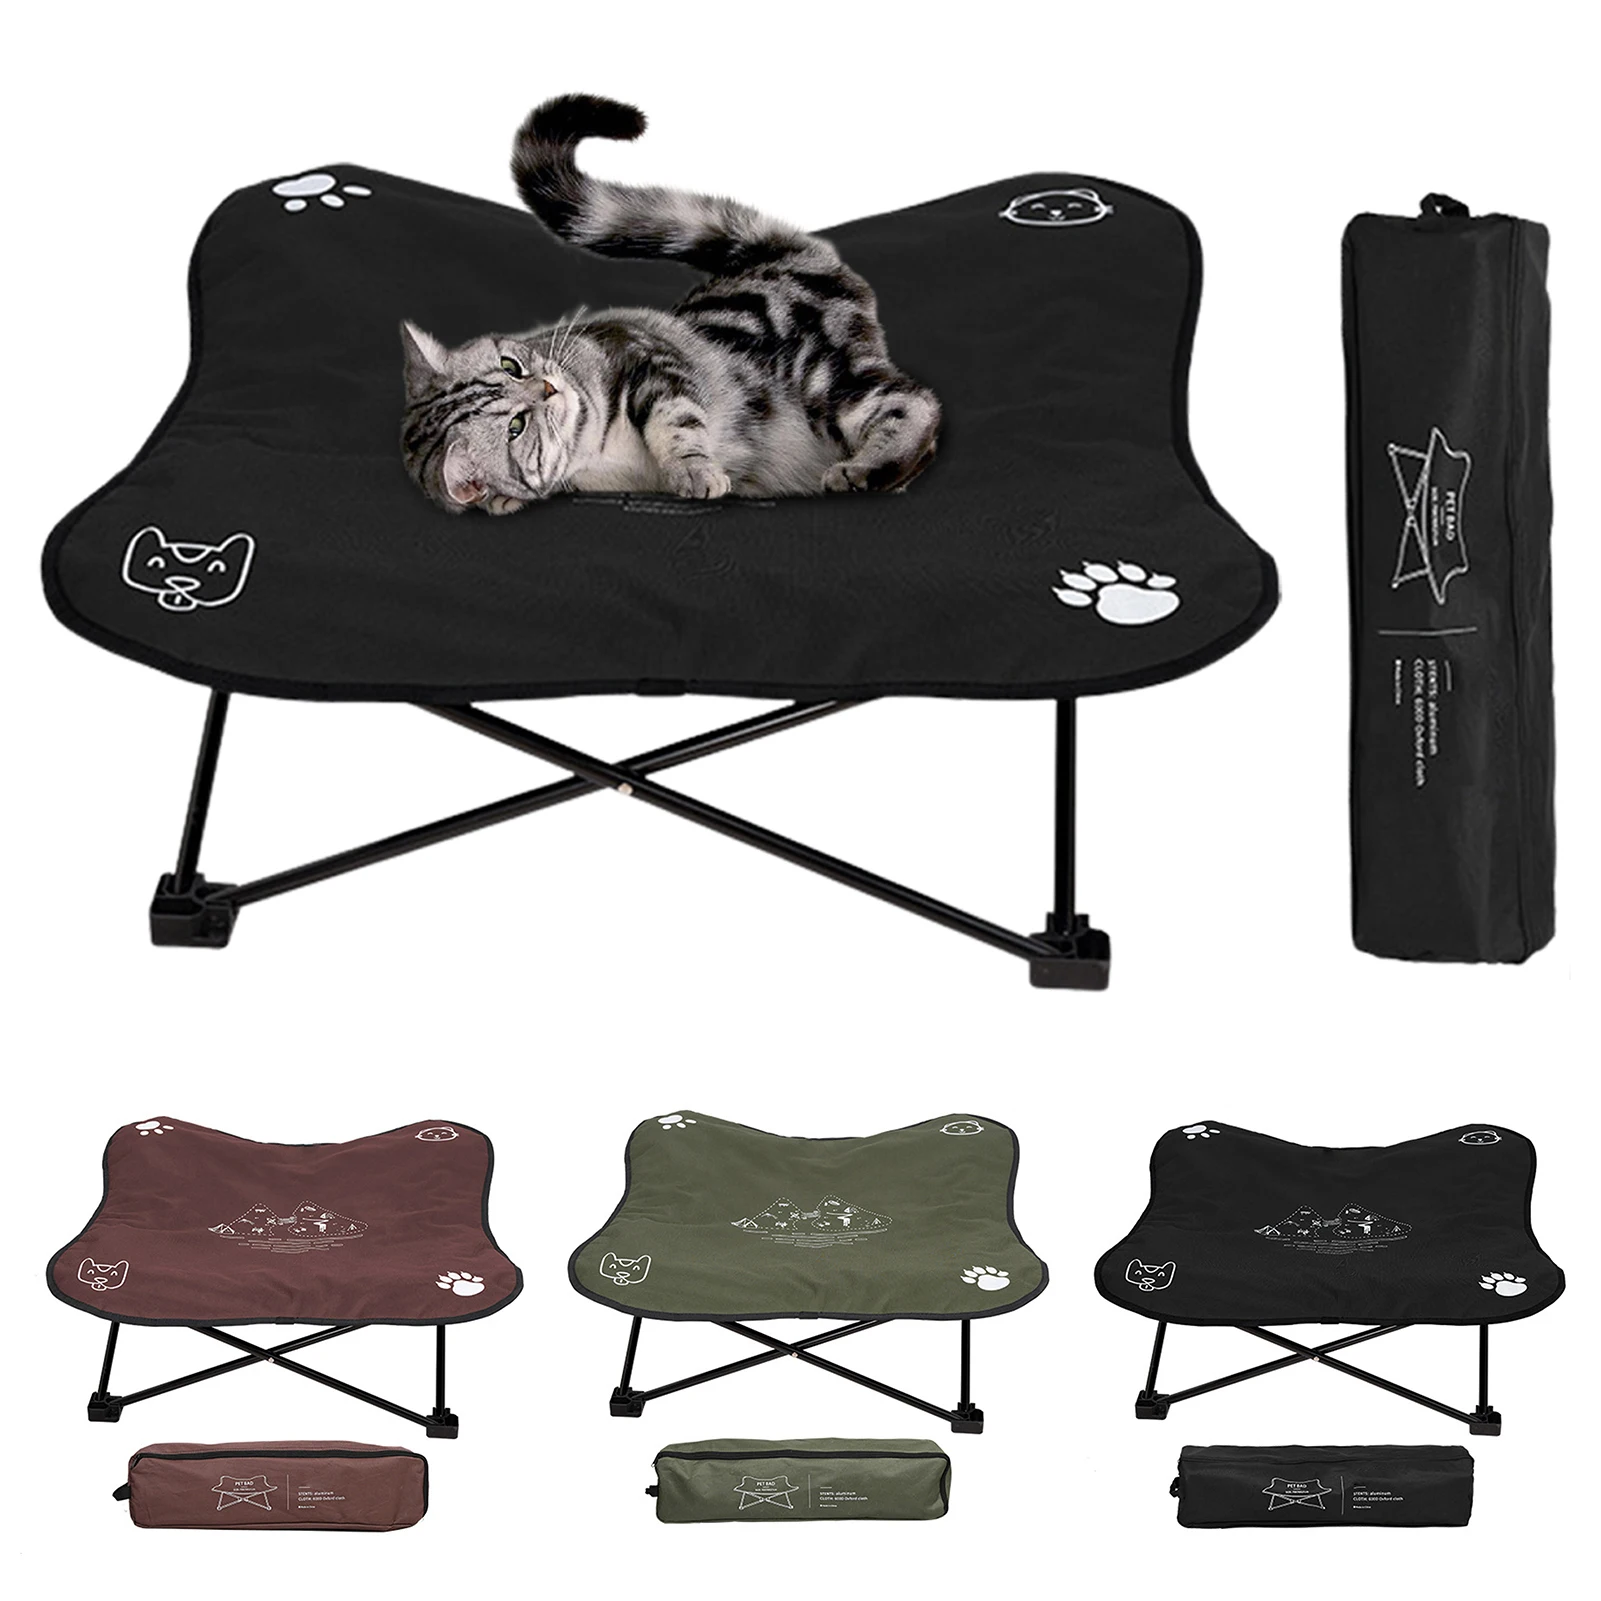 

Pet Dog Bed Portable Safe Folding Dog Sleeping Nest For Cats Pet Lounge Chair Pet Kennel Sofas Cot Raised Dog Bed